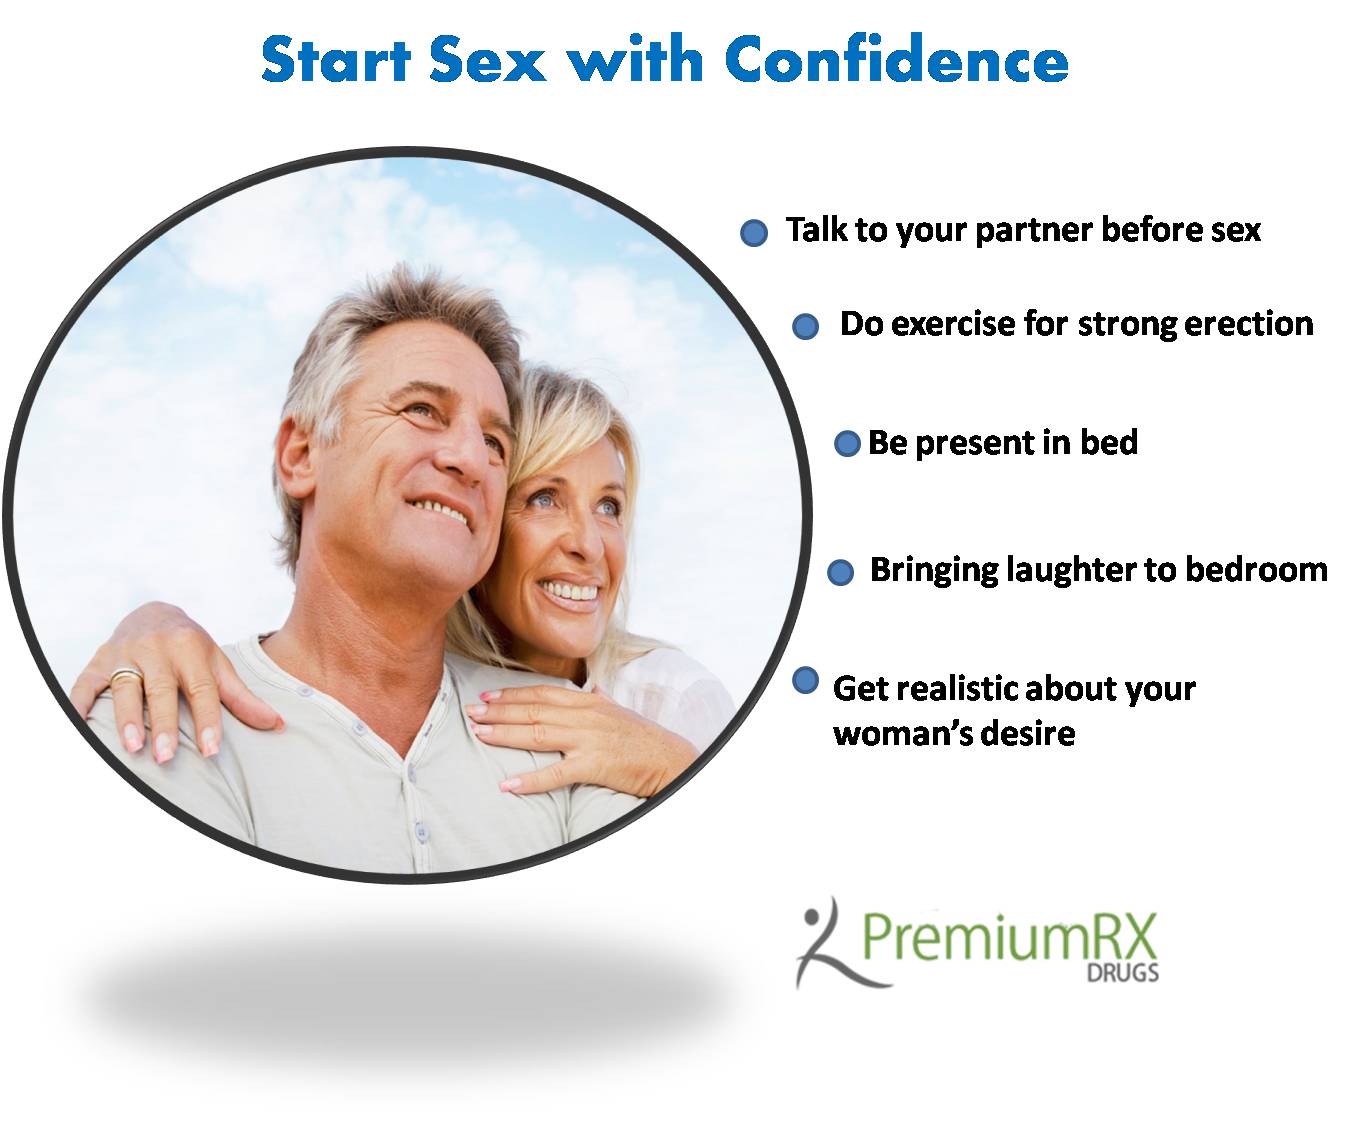 Start Sex with Confidence